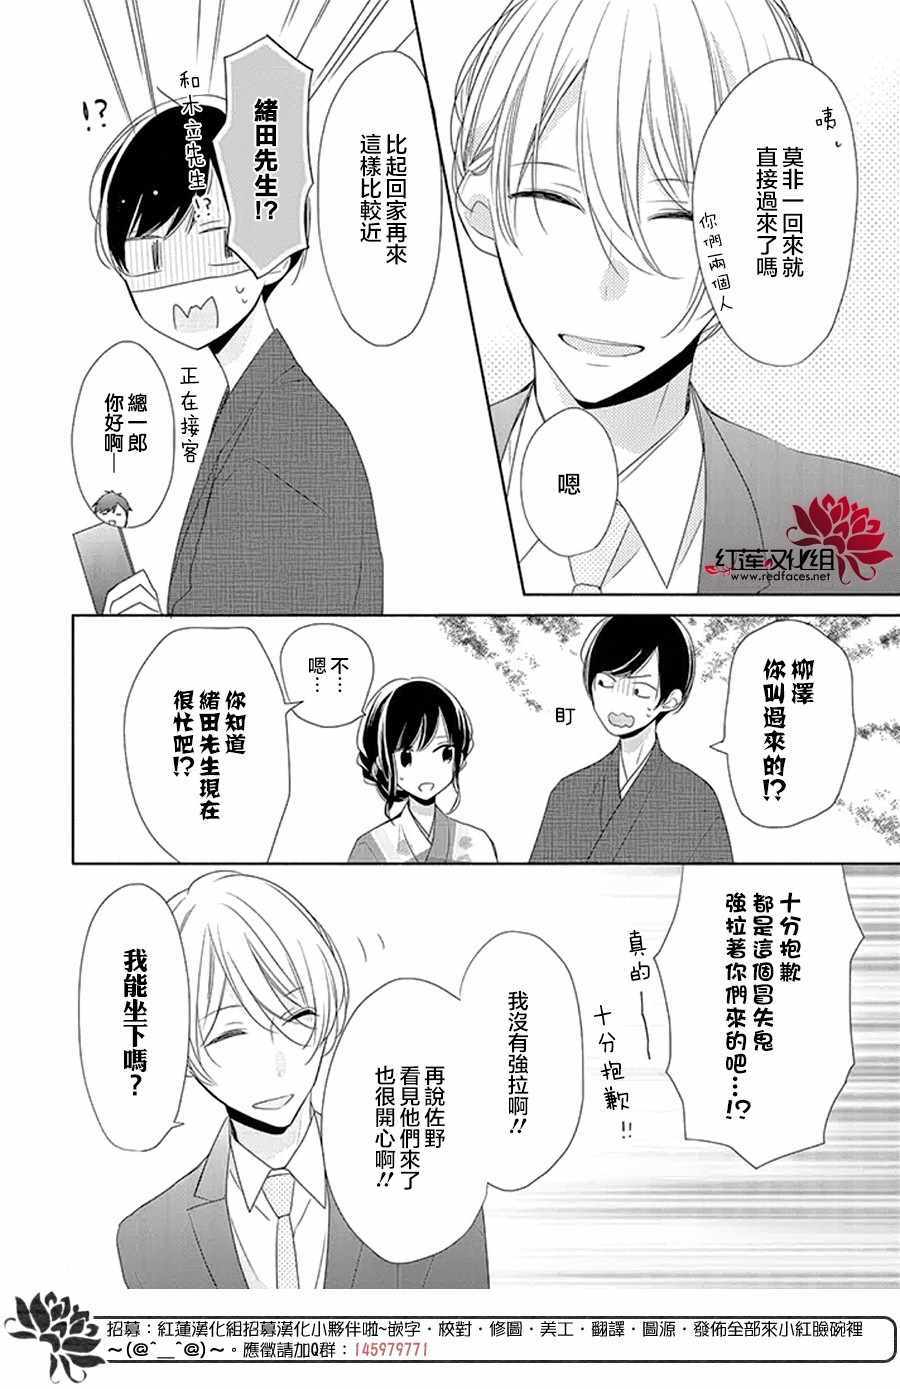 If given a second chance - 16話 - 2